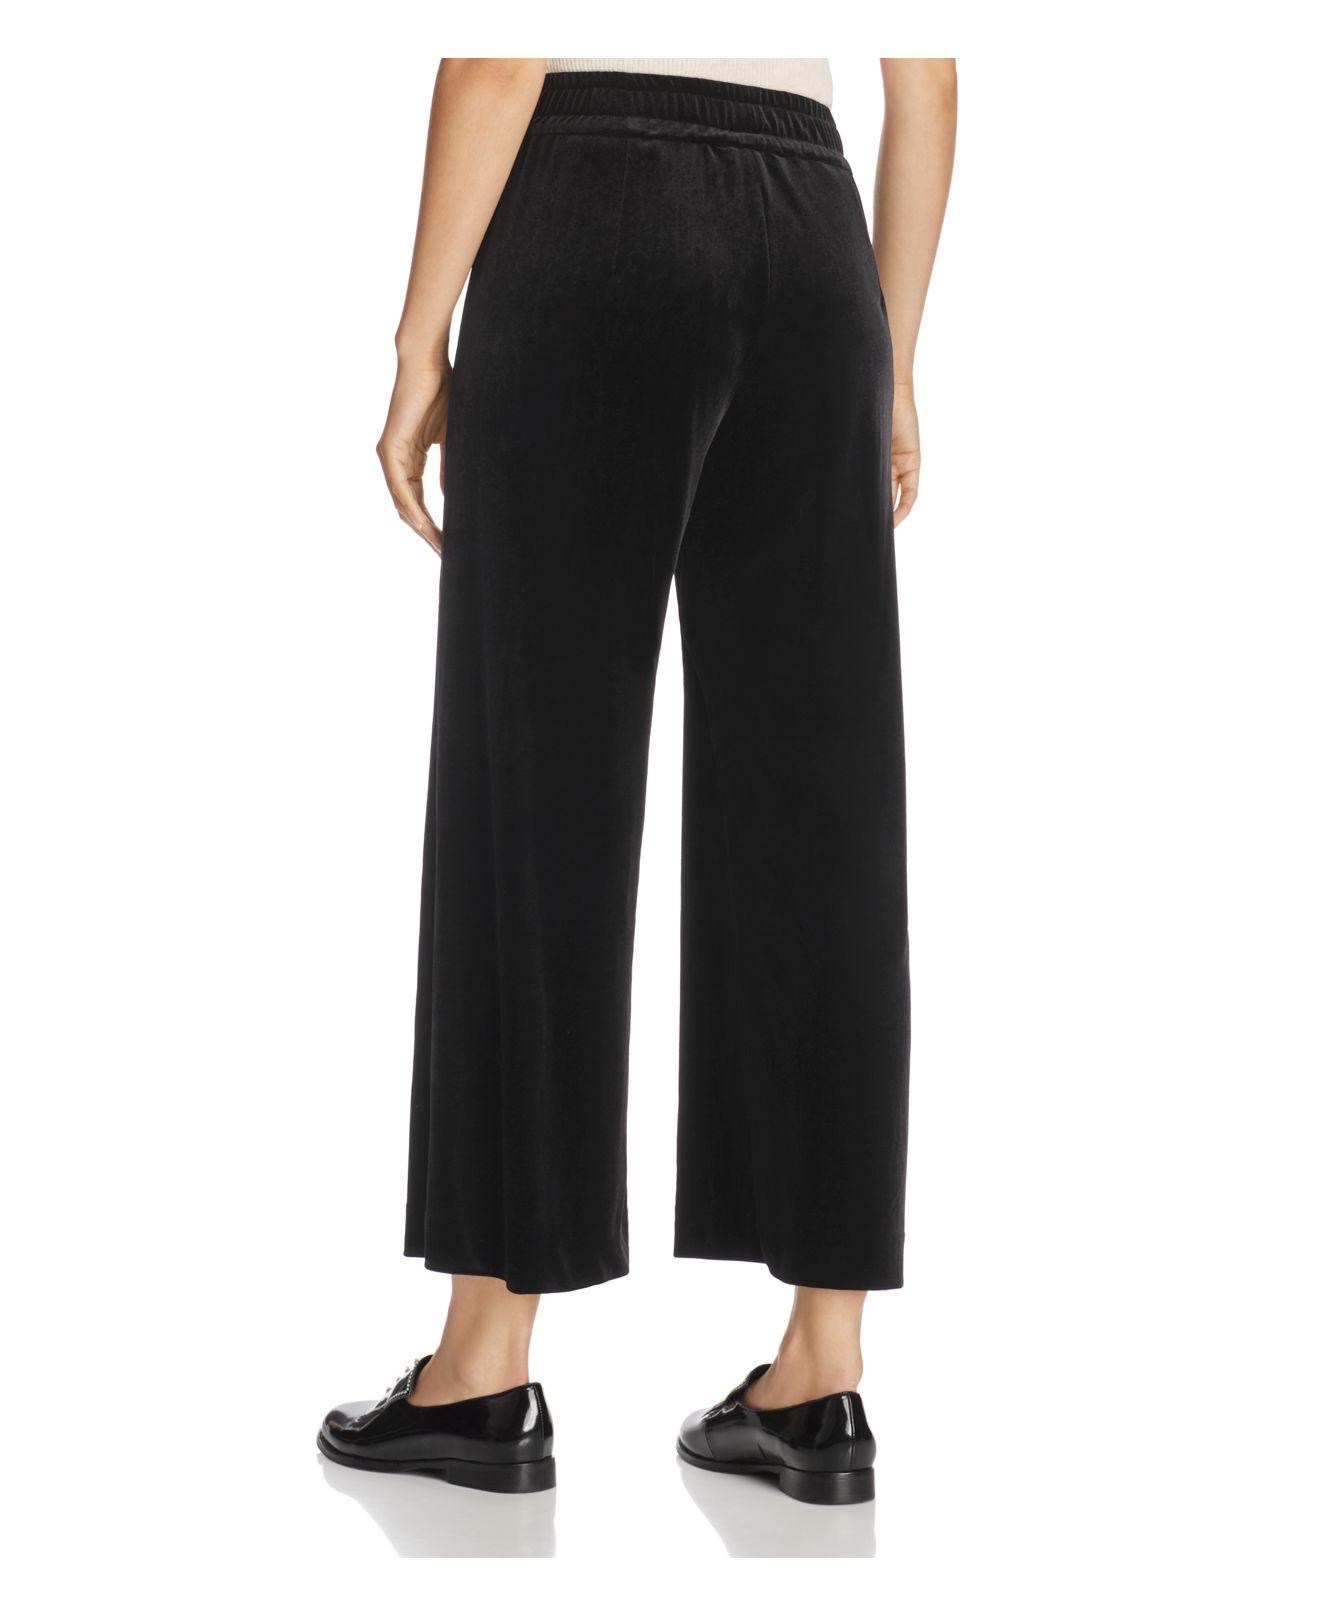 Lyst - French Connection Velvet Pajama Pants in Black